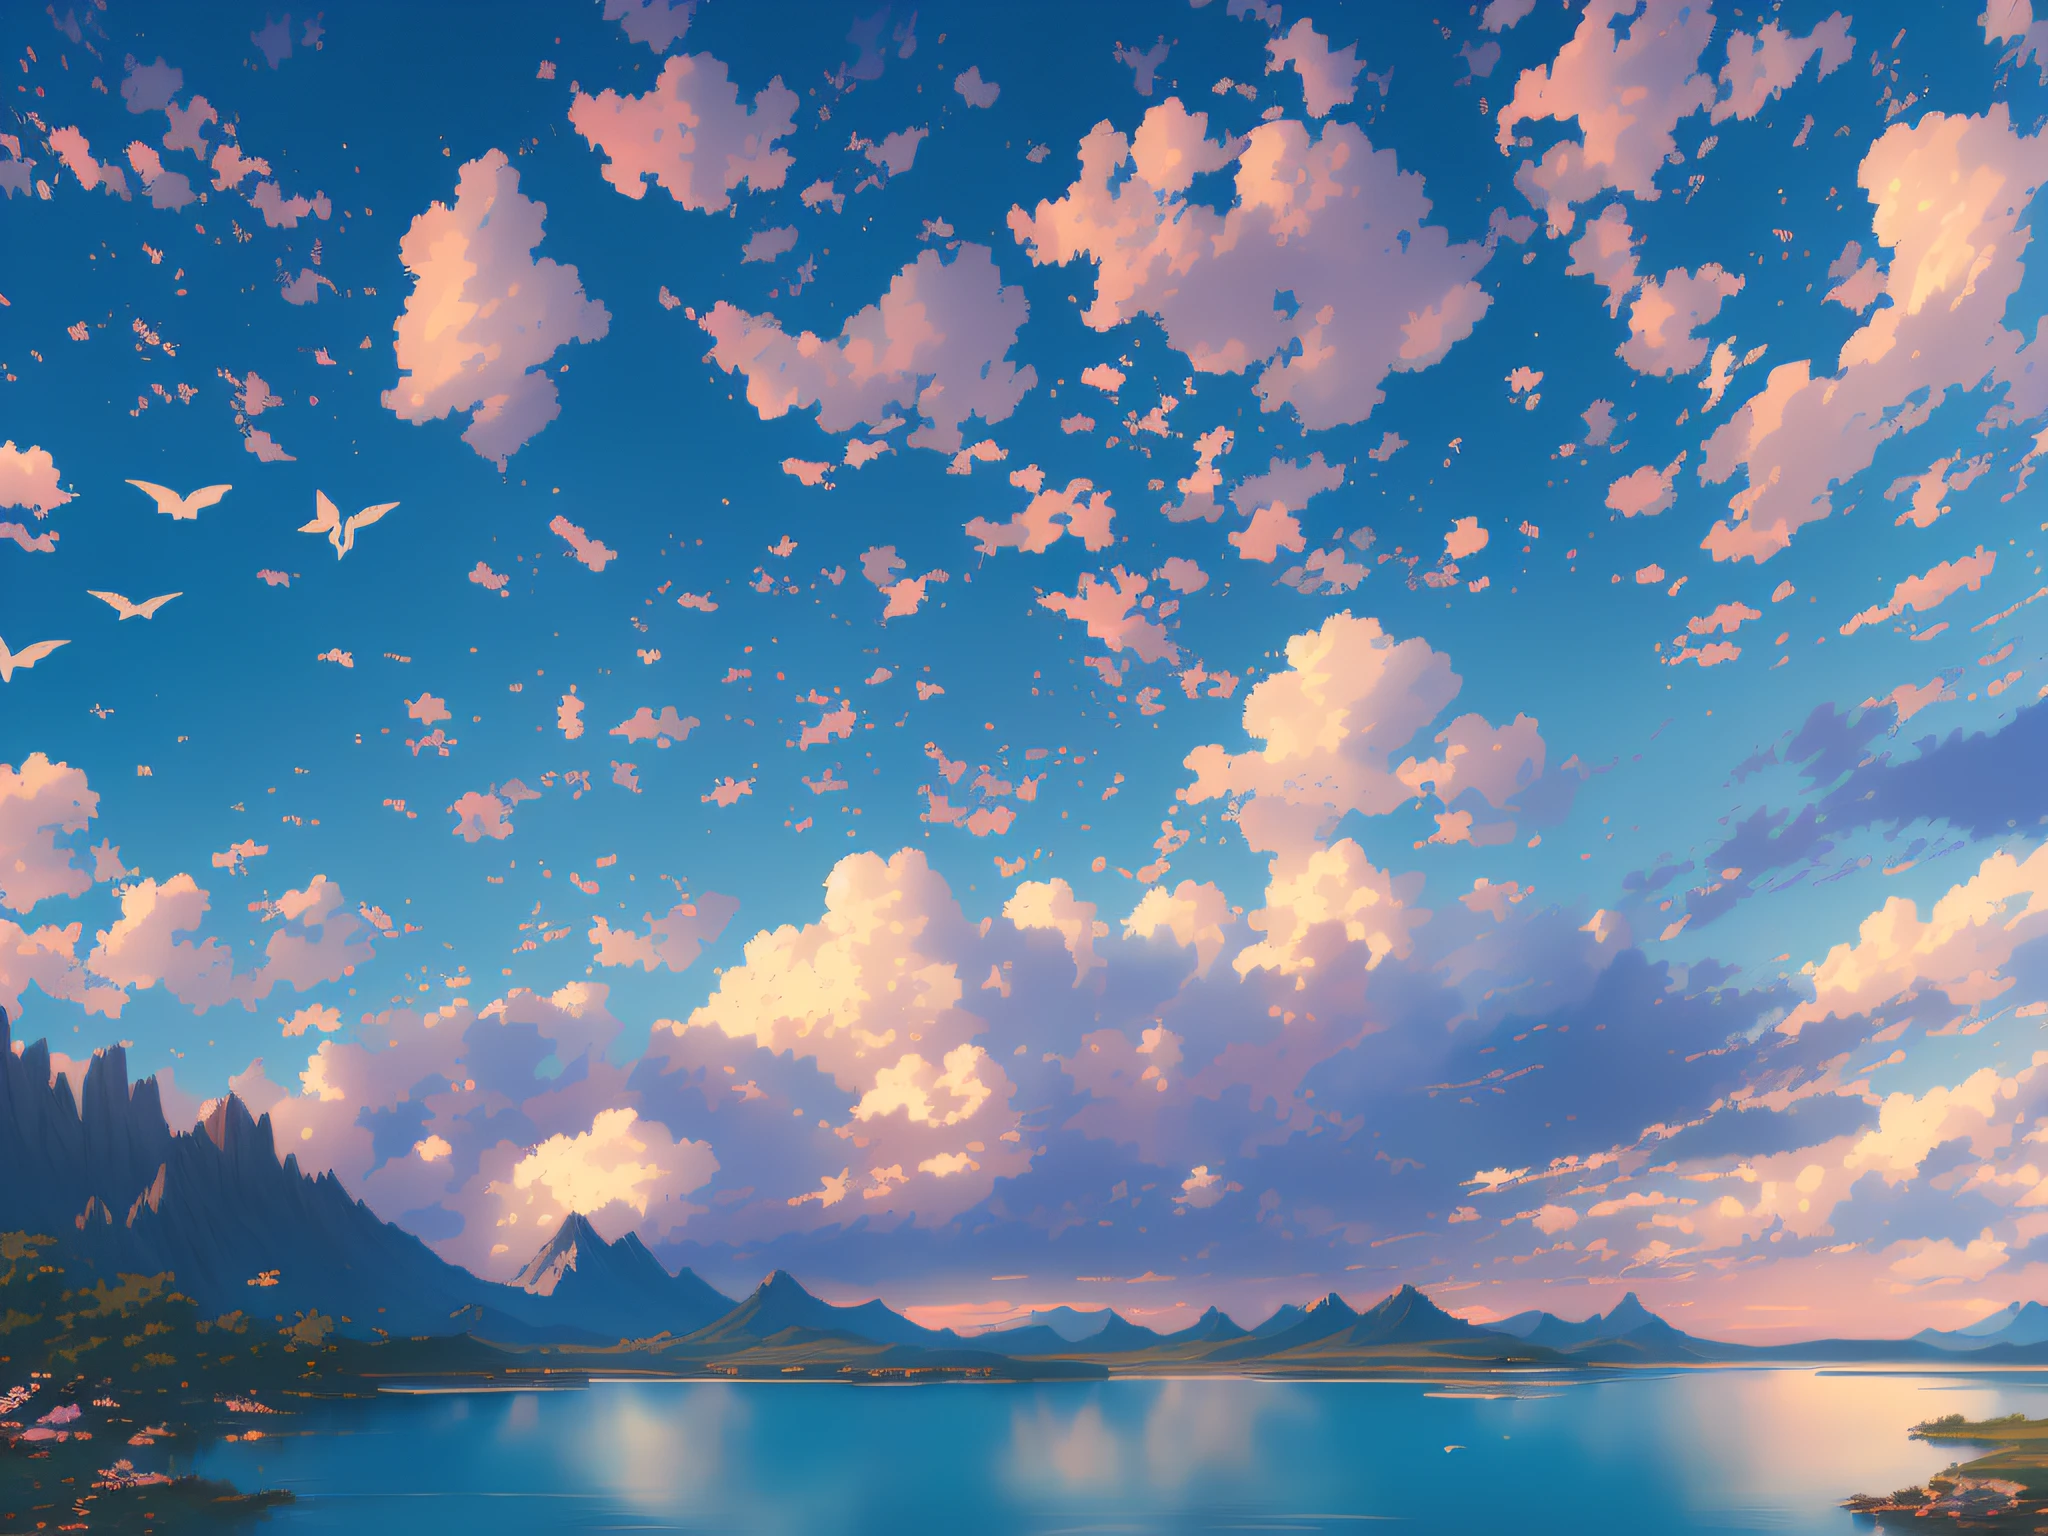 there is a painting of a beautiful mountain lake with birds flying in the sky, detailed scenery —width 672, beautifull puffy clouds. anime, anime landscape wallpaper, anime clouds, anime landscape, beautiful anime scenery, anime beautiful peace scene, beautiful anime scene, fluffy pink anime clouds, ross tran. scenic background, anime sky, anime scenery, anime background